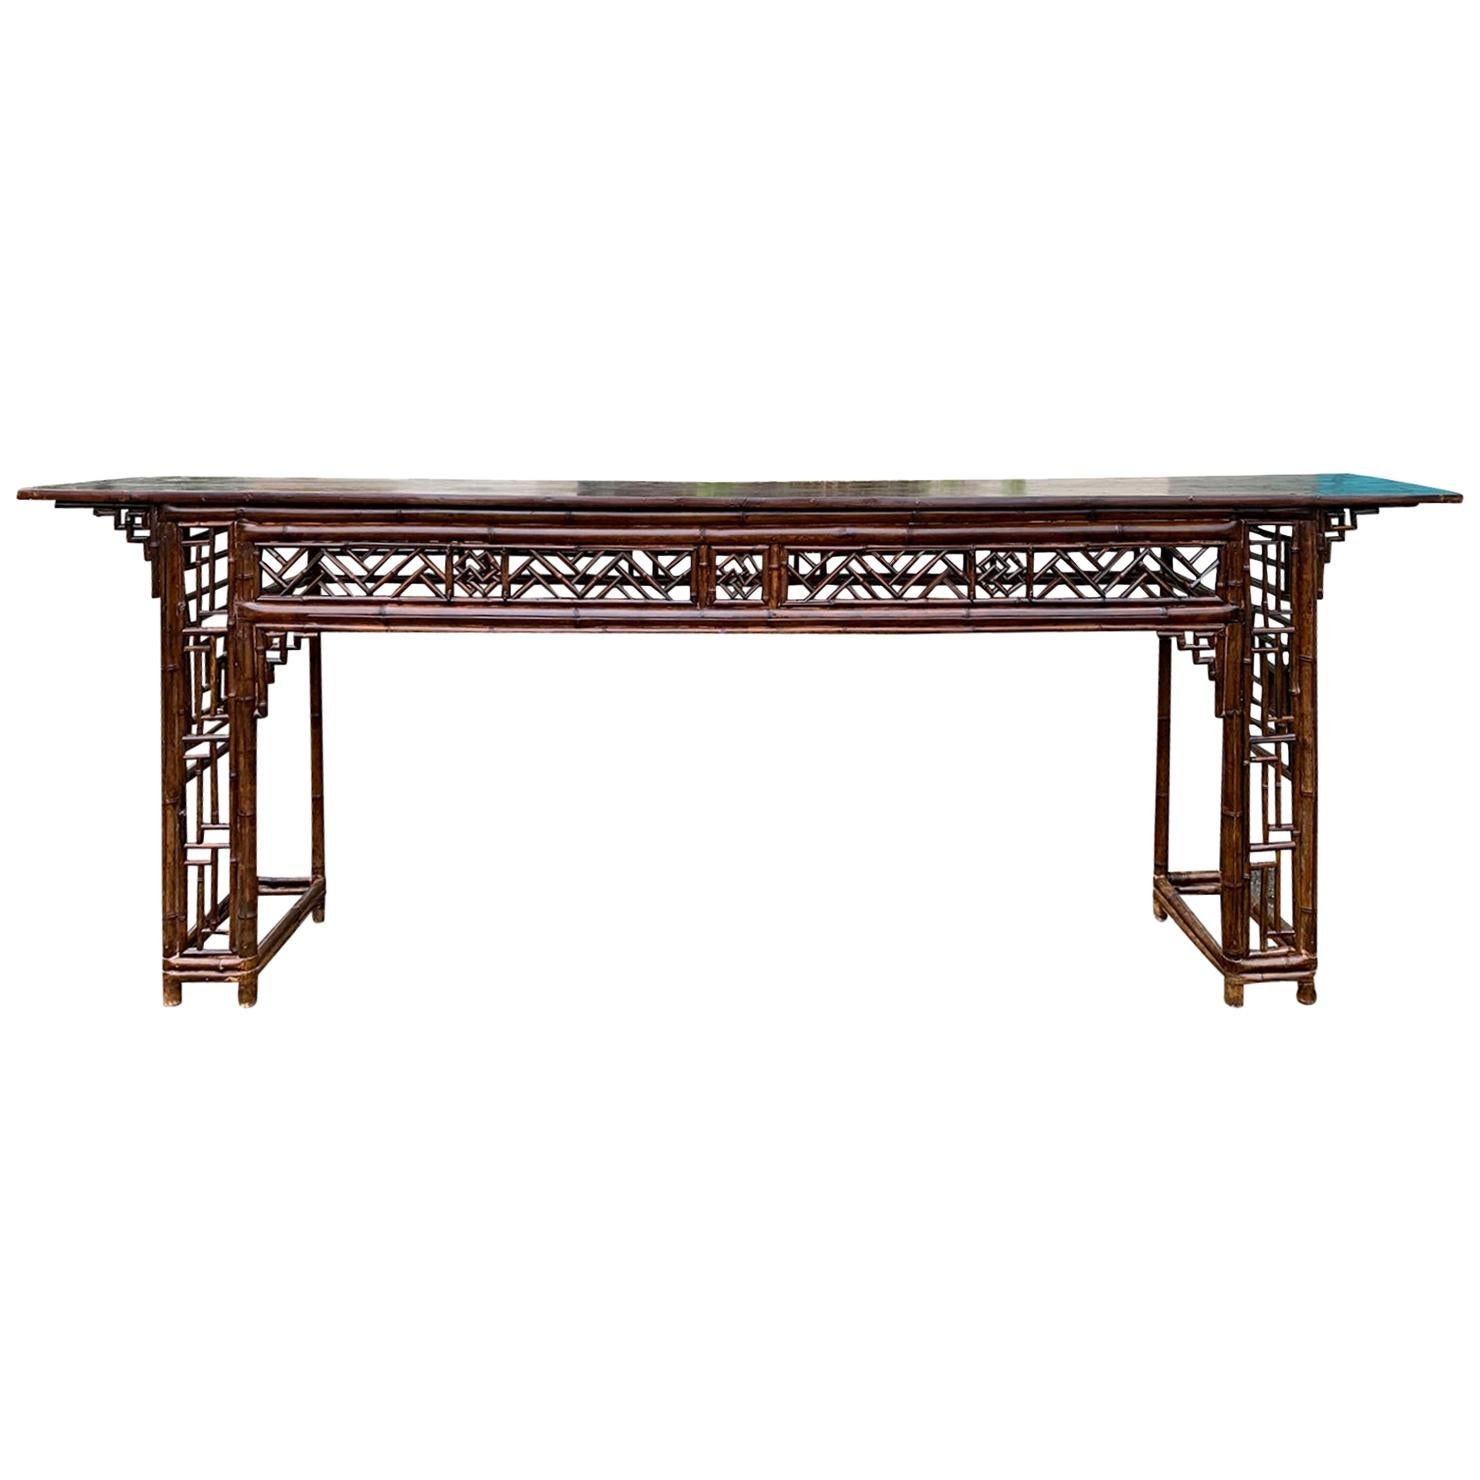 Late 19th Century circa 1880 Chinese Bamboo Altar Table / Long Console